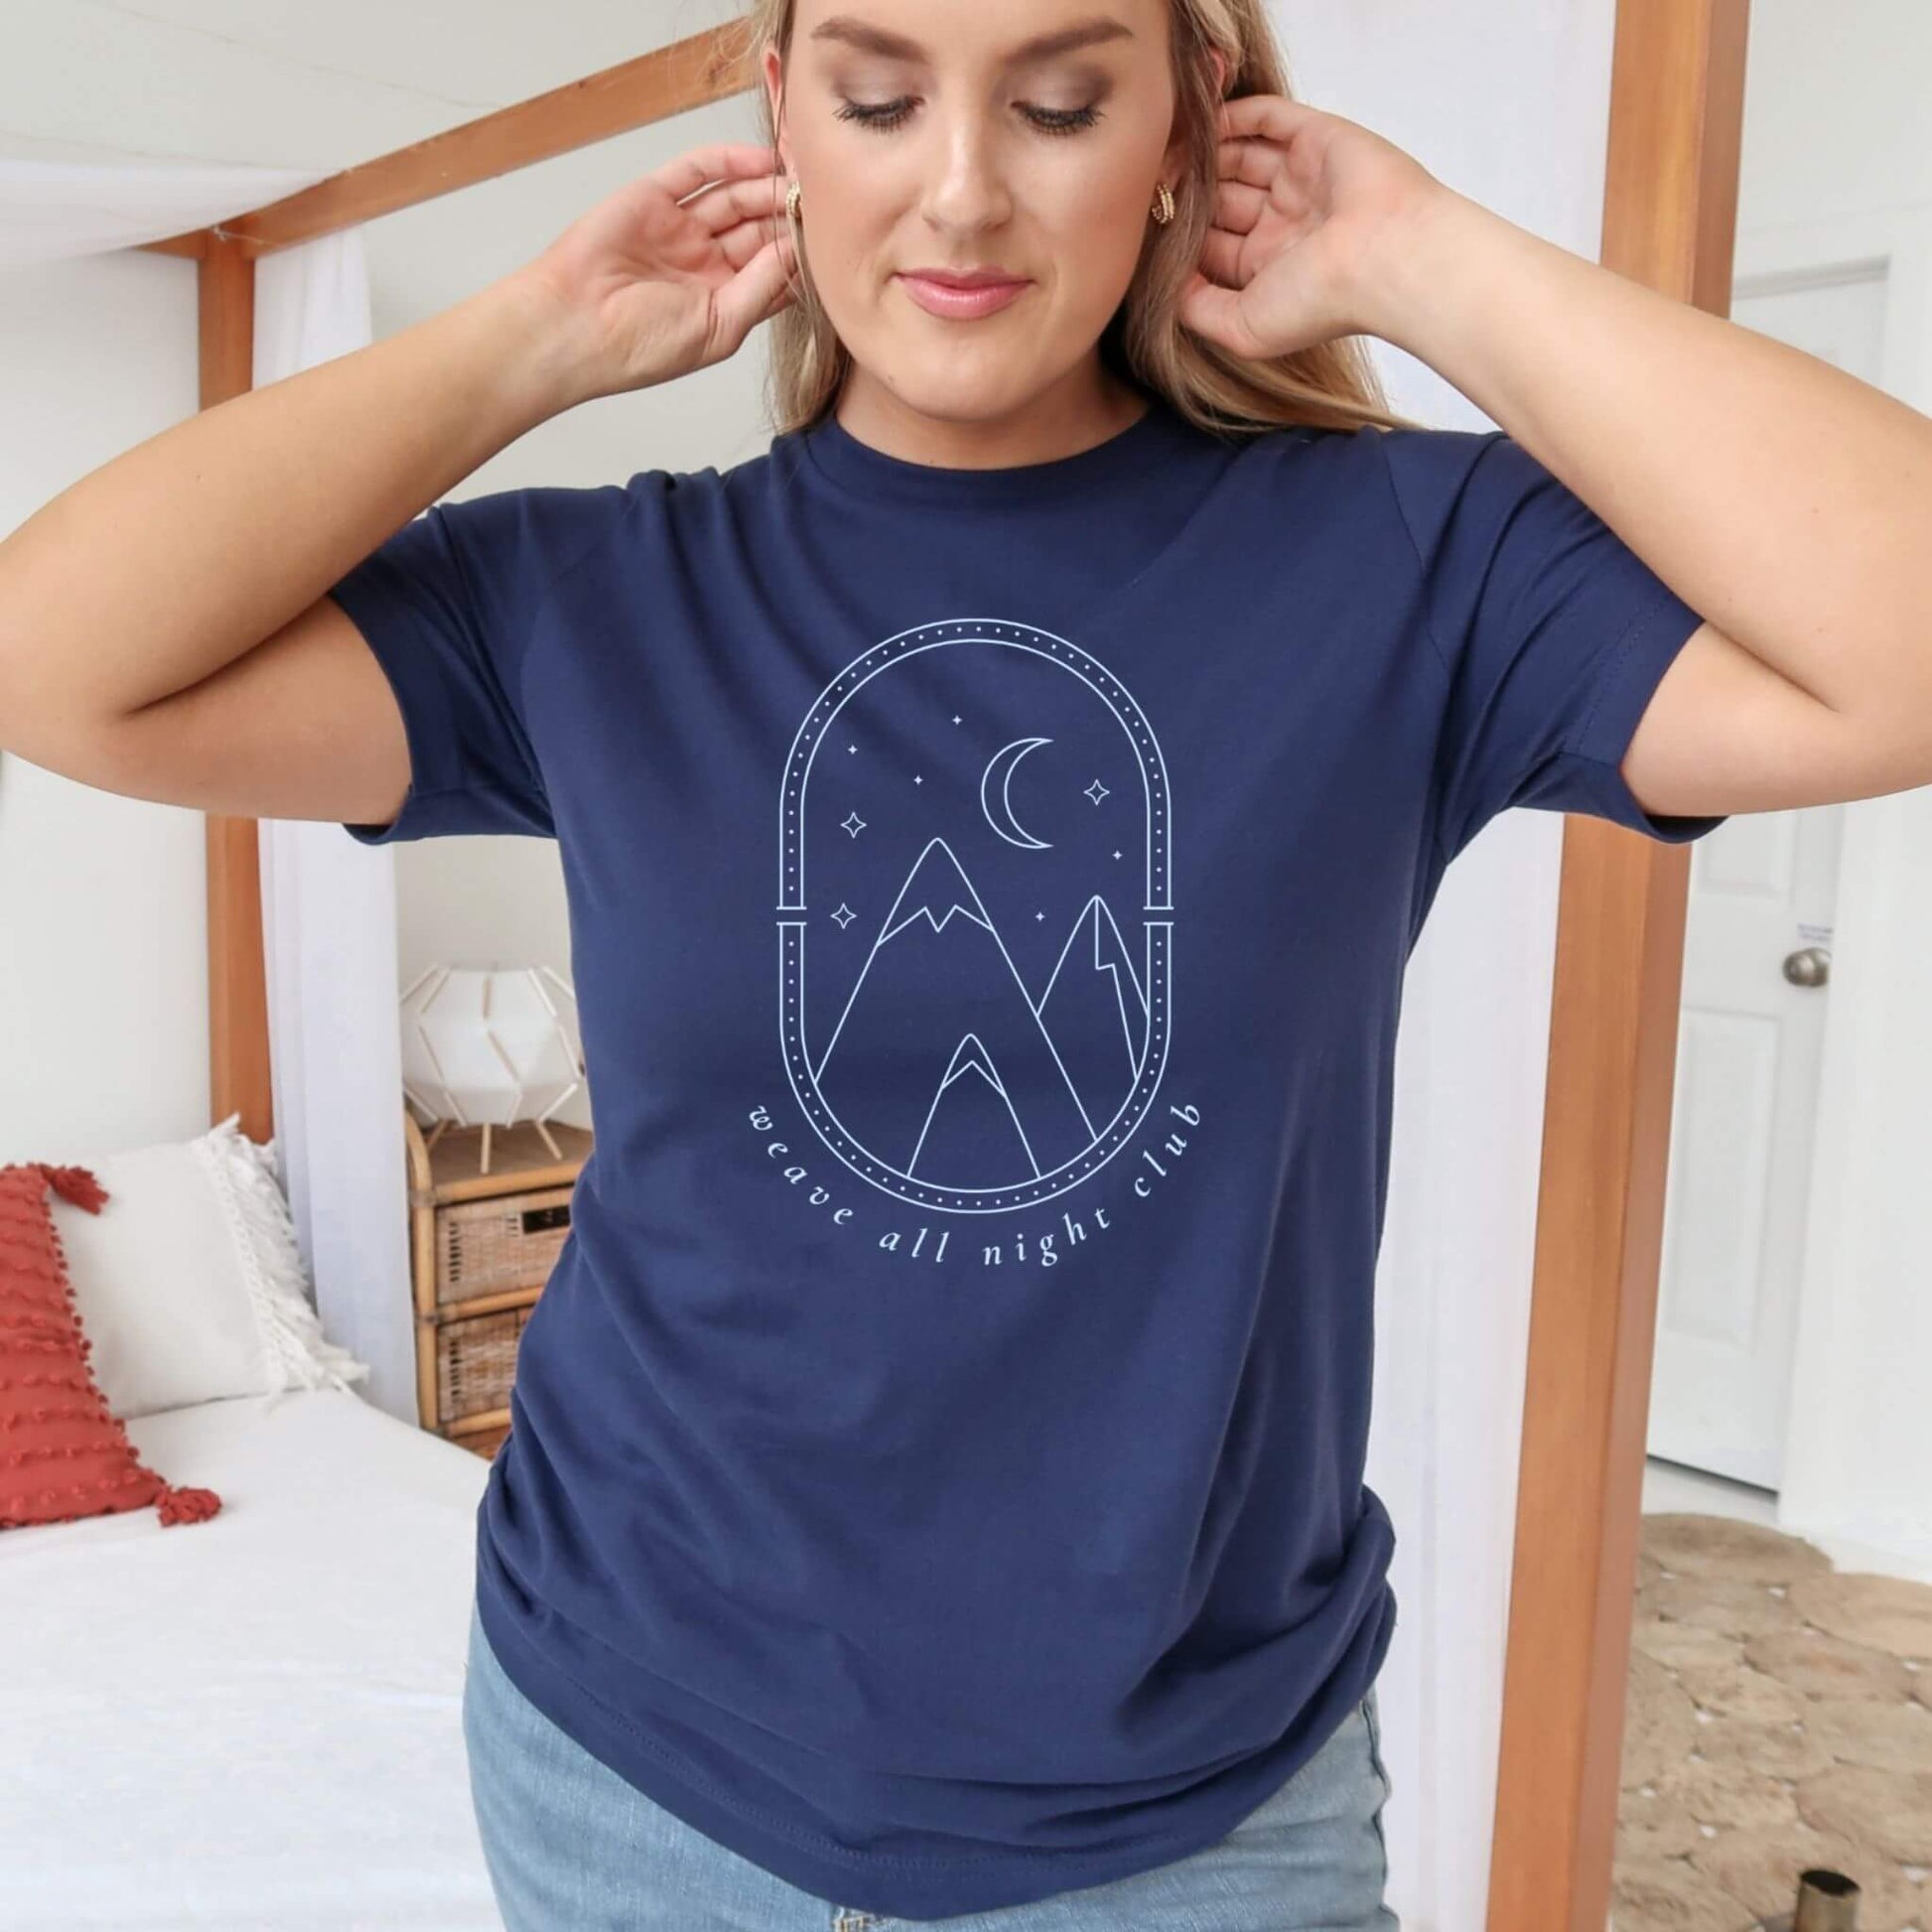 weave all night club dark blue tshirt with mountain moon and stars on t-shirt